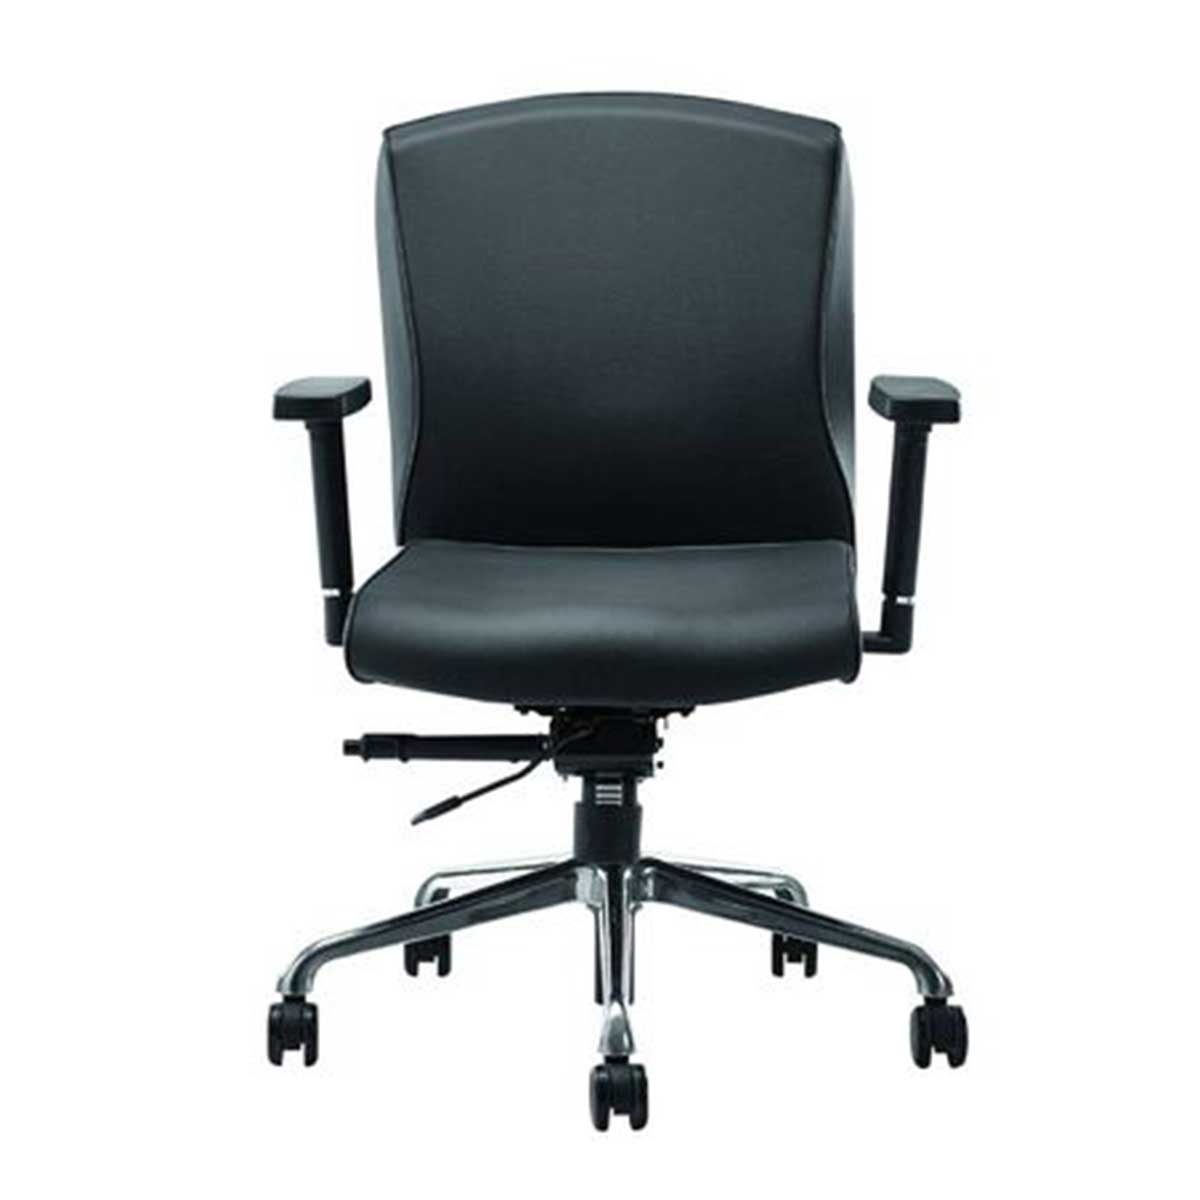 Low Back Office Chair Manufacturers, Suppliers, Exporters in Delhi 